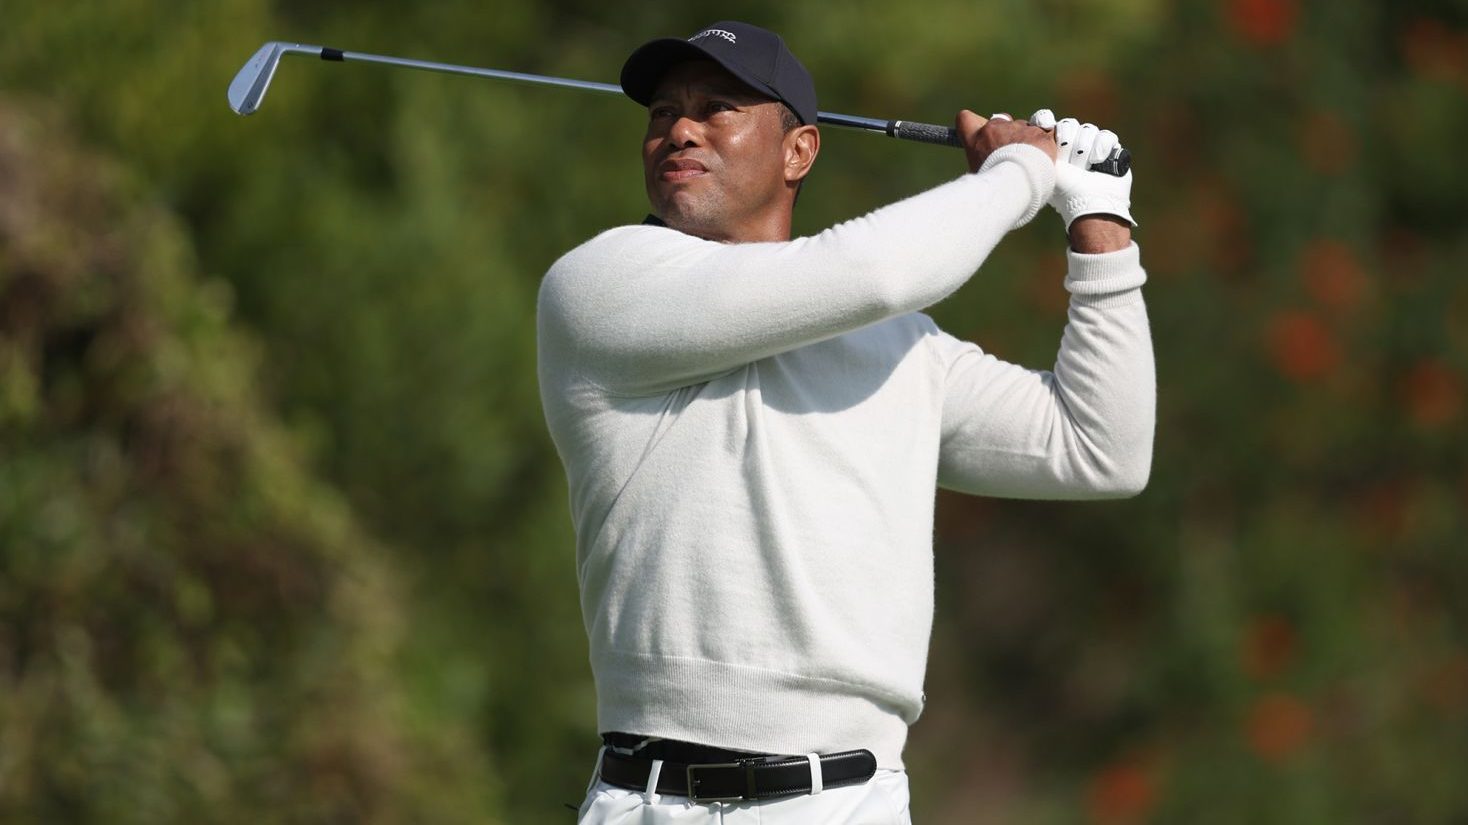 Tiger Woods Withdraws From The Genesis Invitational Due To Illness